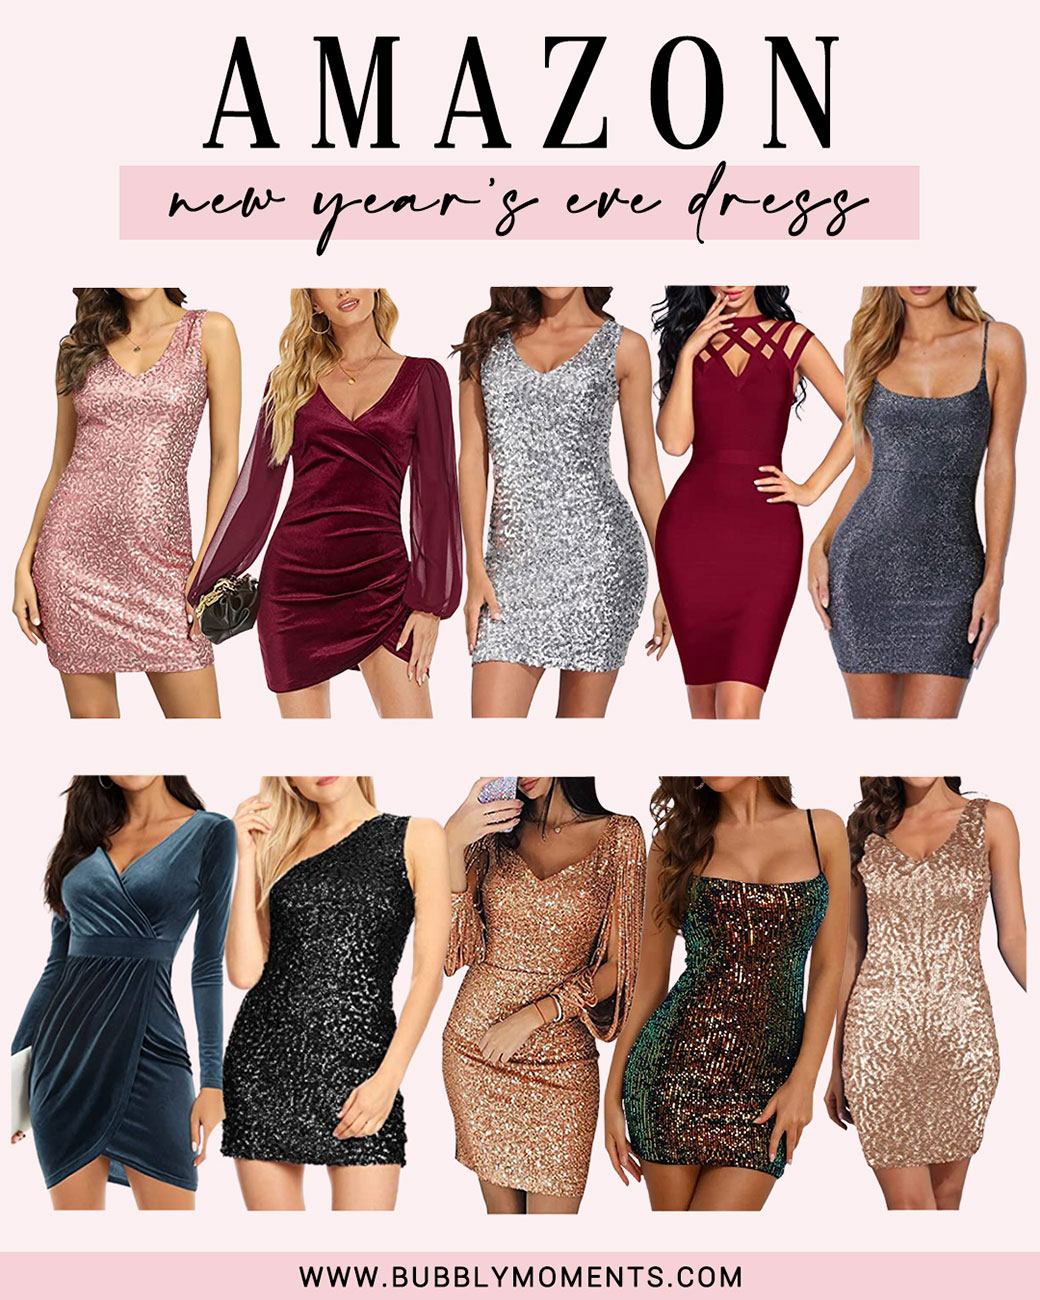 christmas outfits | holiday outfits | new years eve outfits | holiday outfit ideas | cocktail dress | one shoulder dress | velvet dresses | party dresses | luxury outfits | strapless dress | baclkess outfits | glitter bodycon | wrap dress | black dress | amazon finds | Bubbly Moments